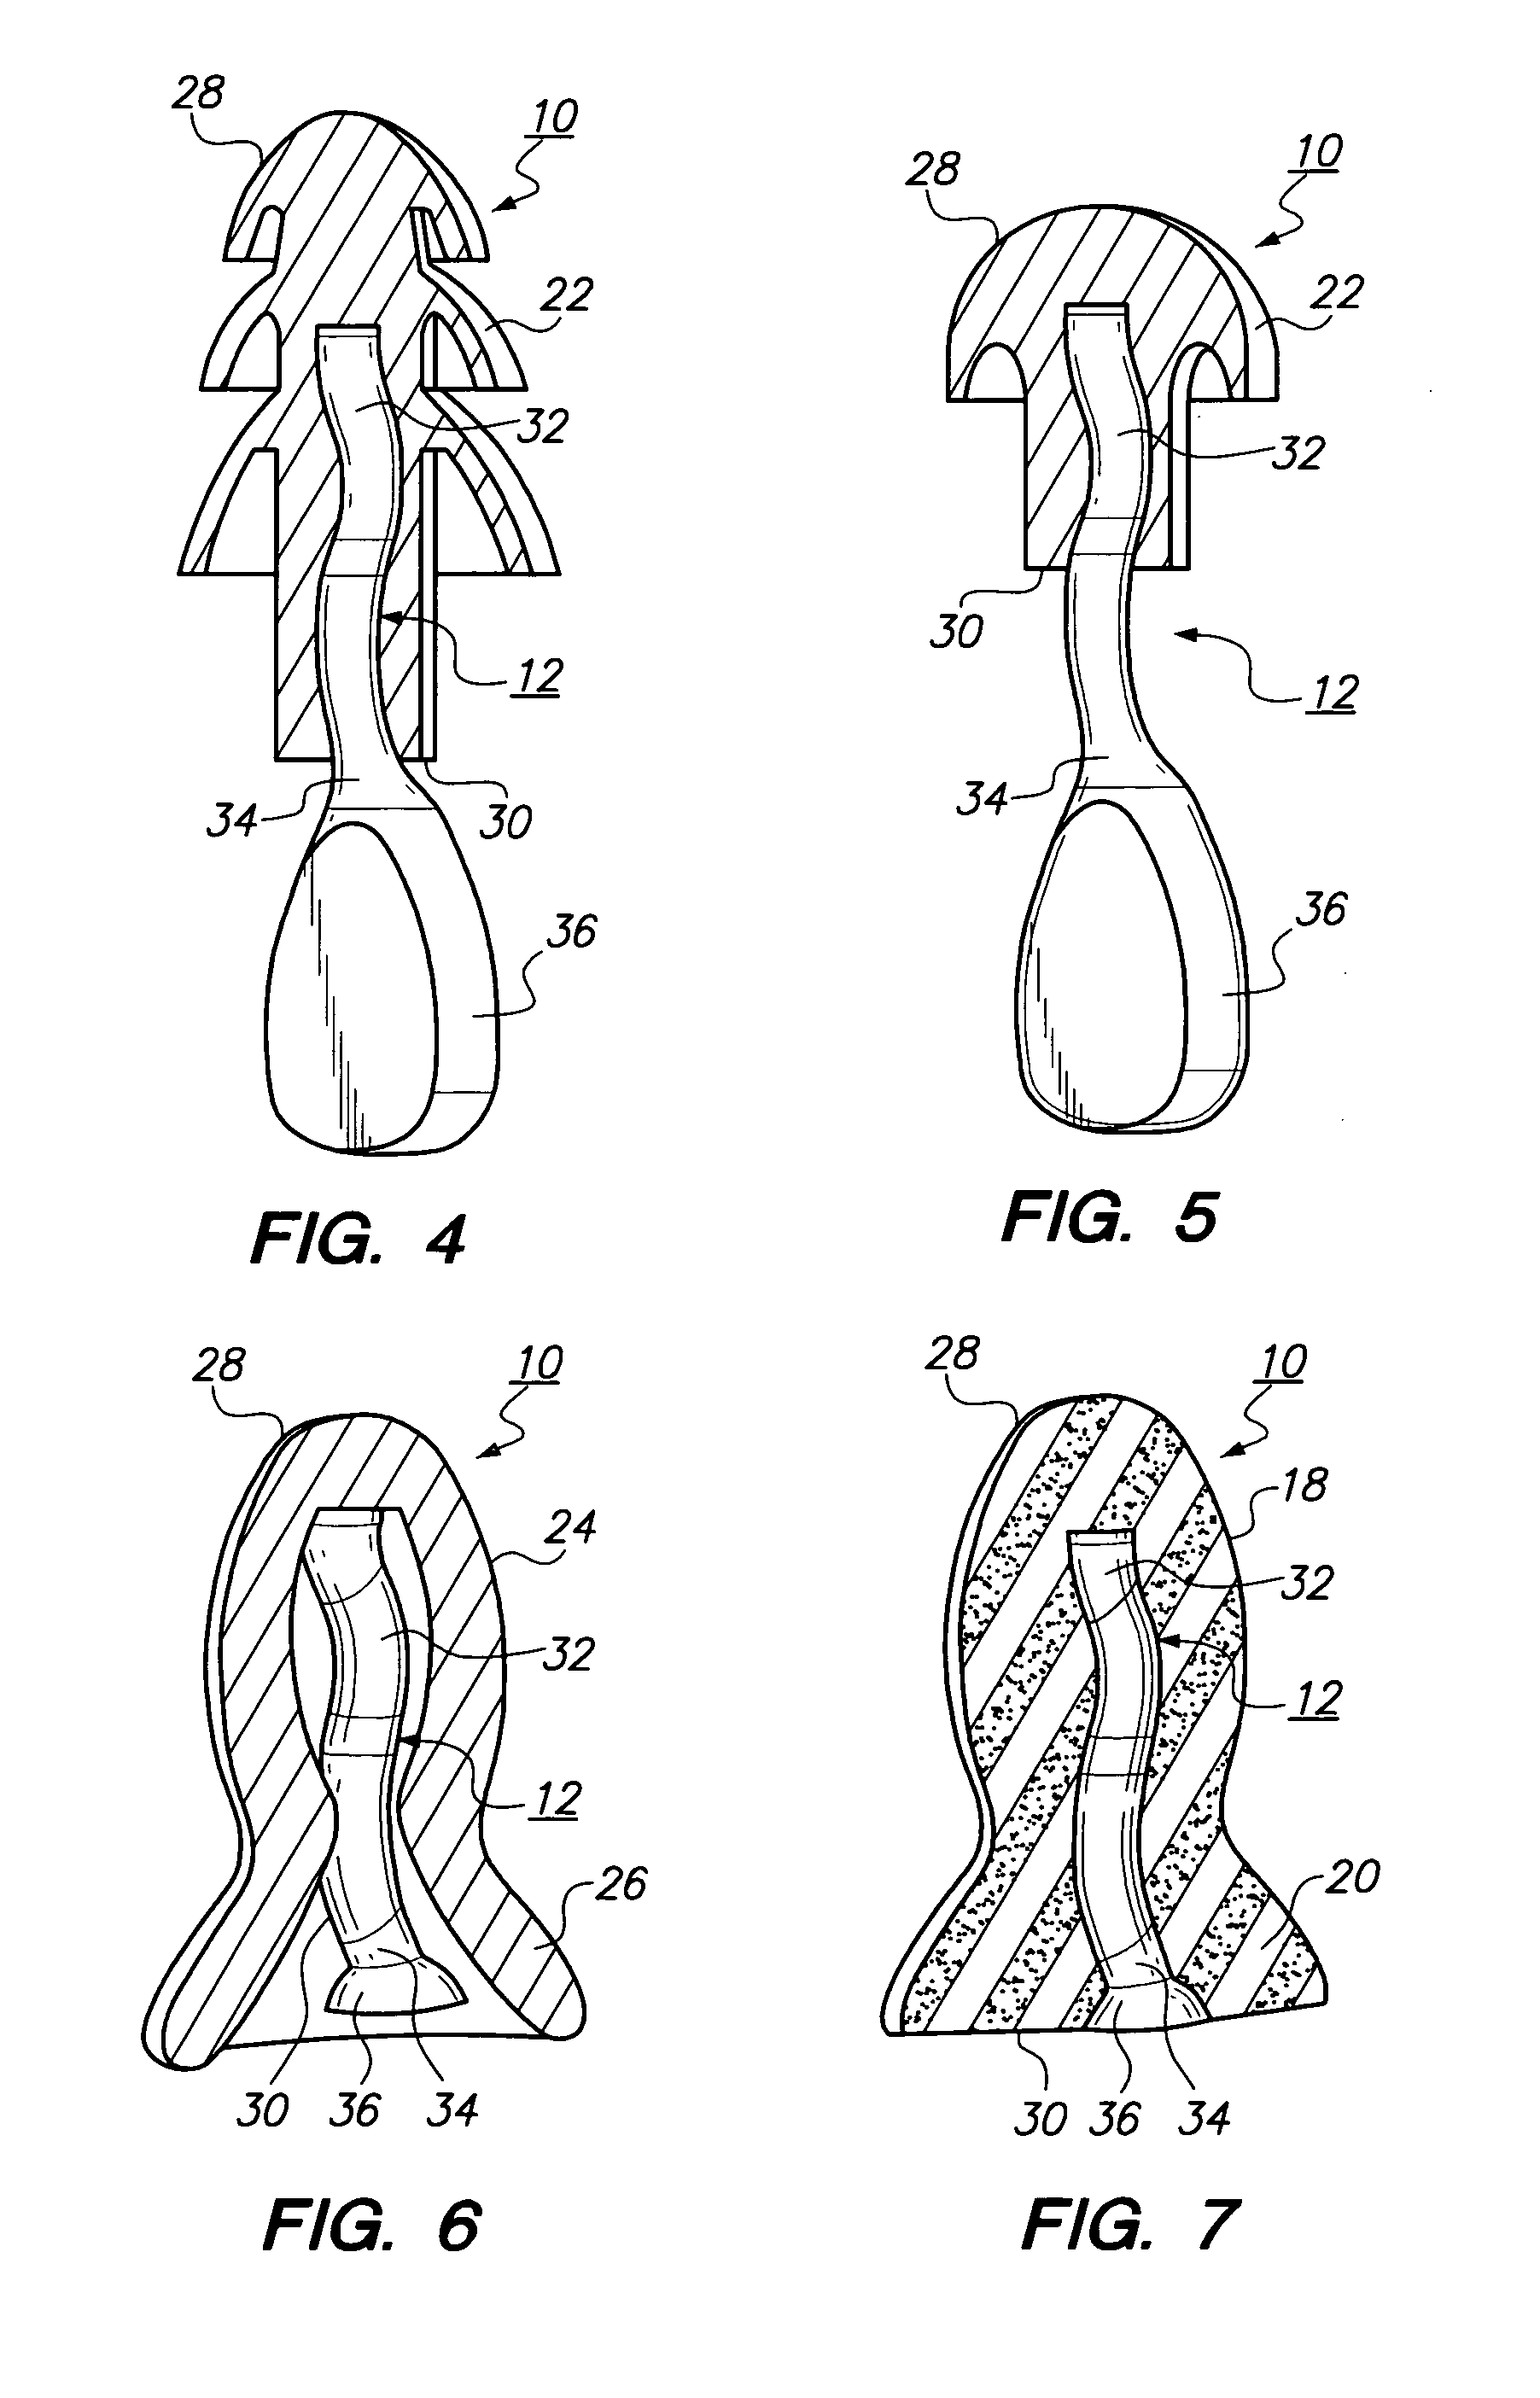 Push-in type of earplug with improved insertion stem